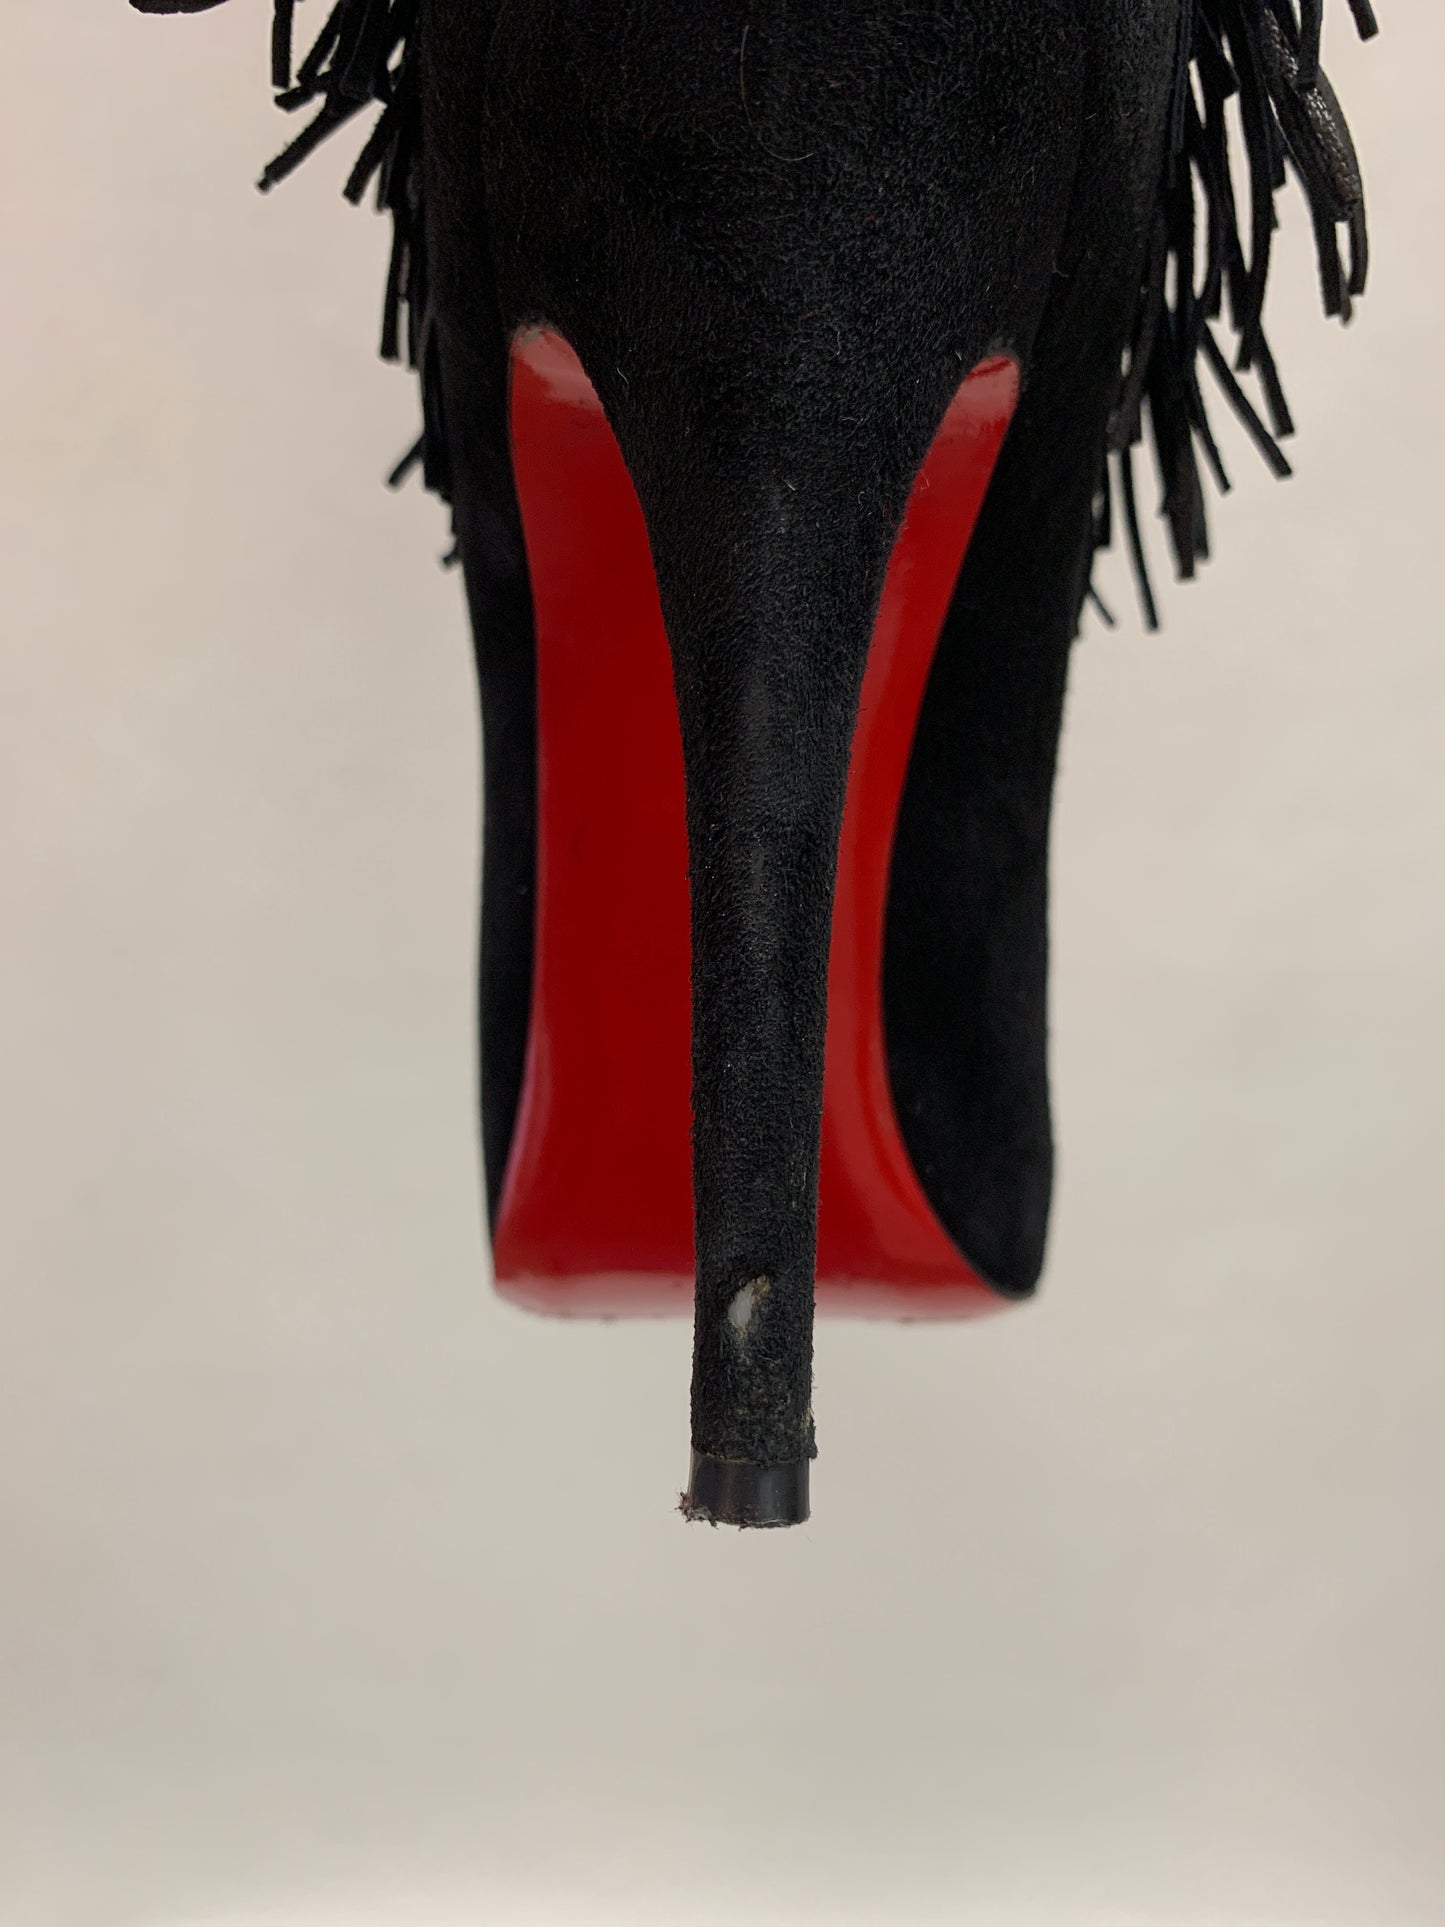 Authentic Christian Louboutin Black Suede Rom Fringe Boots